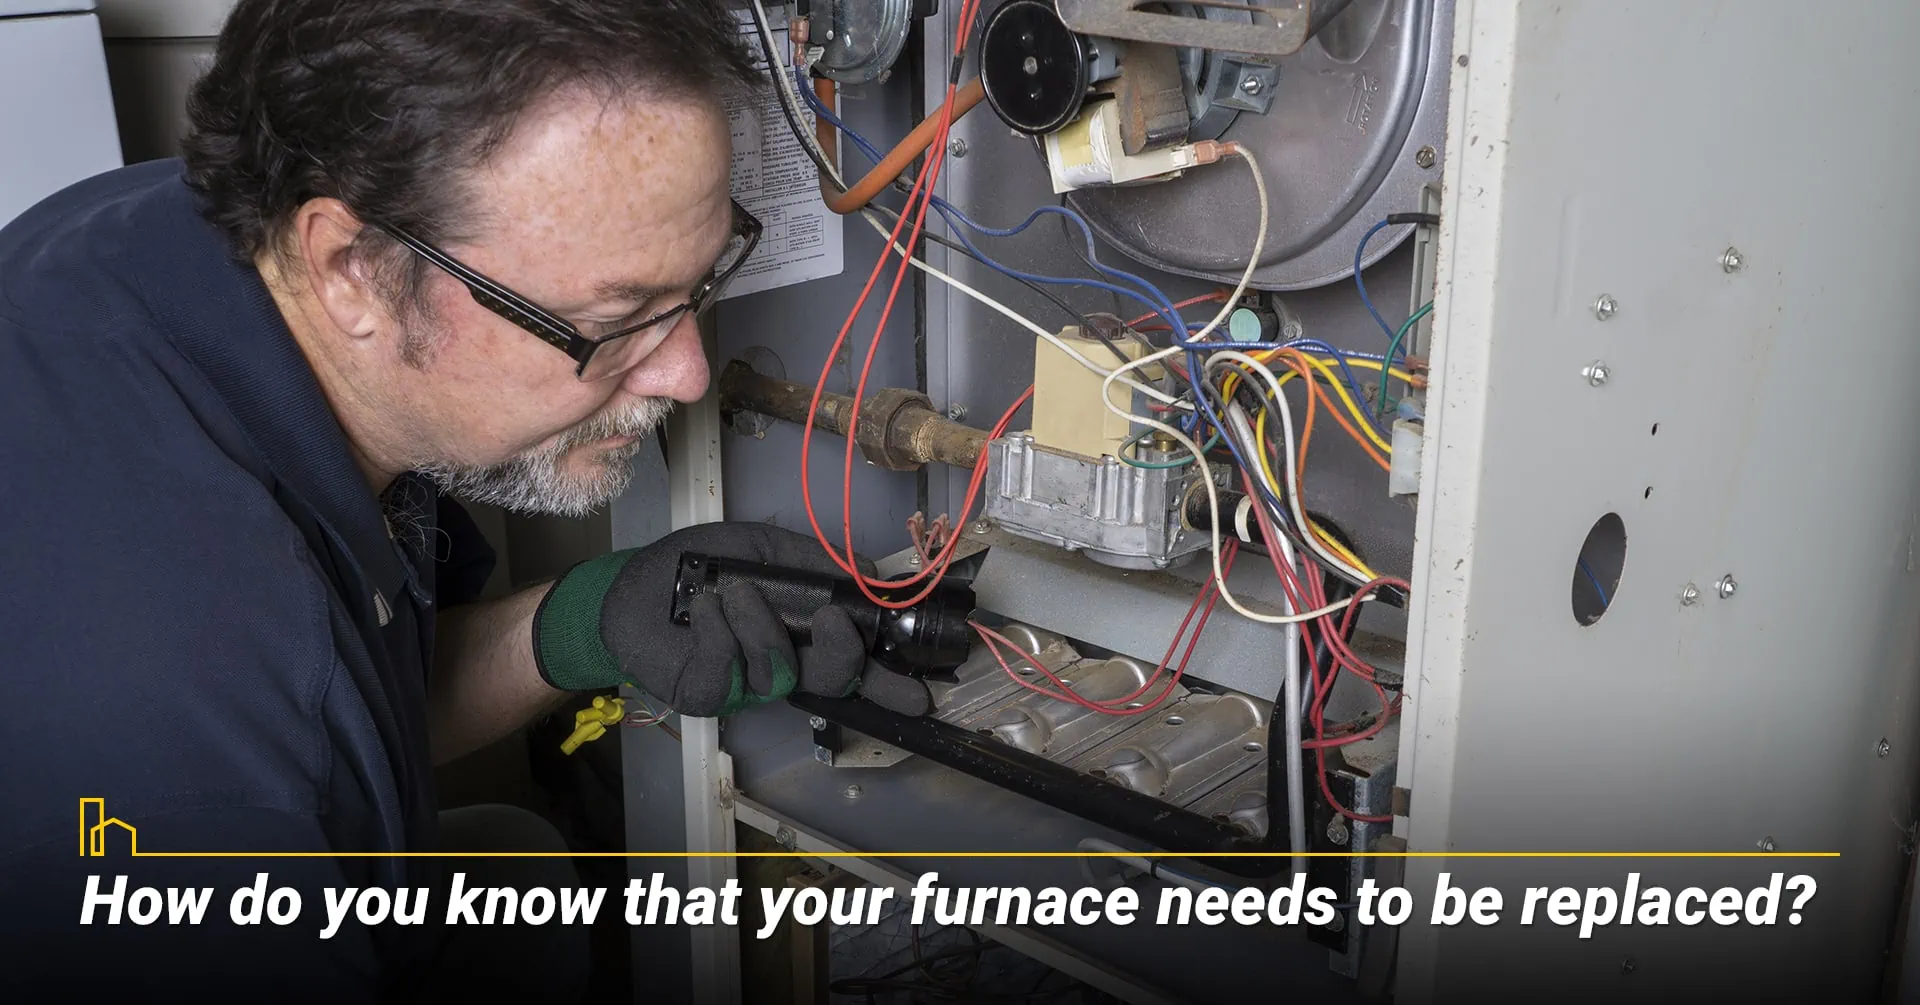 2. How do you know that your furnace needs to be replaced?